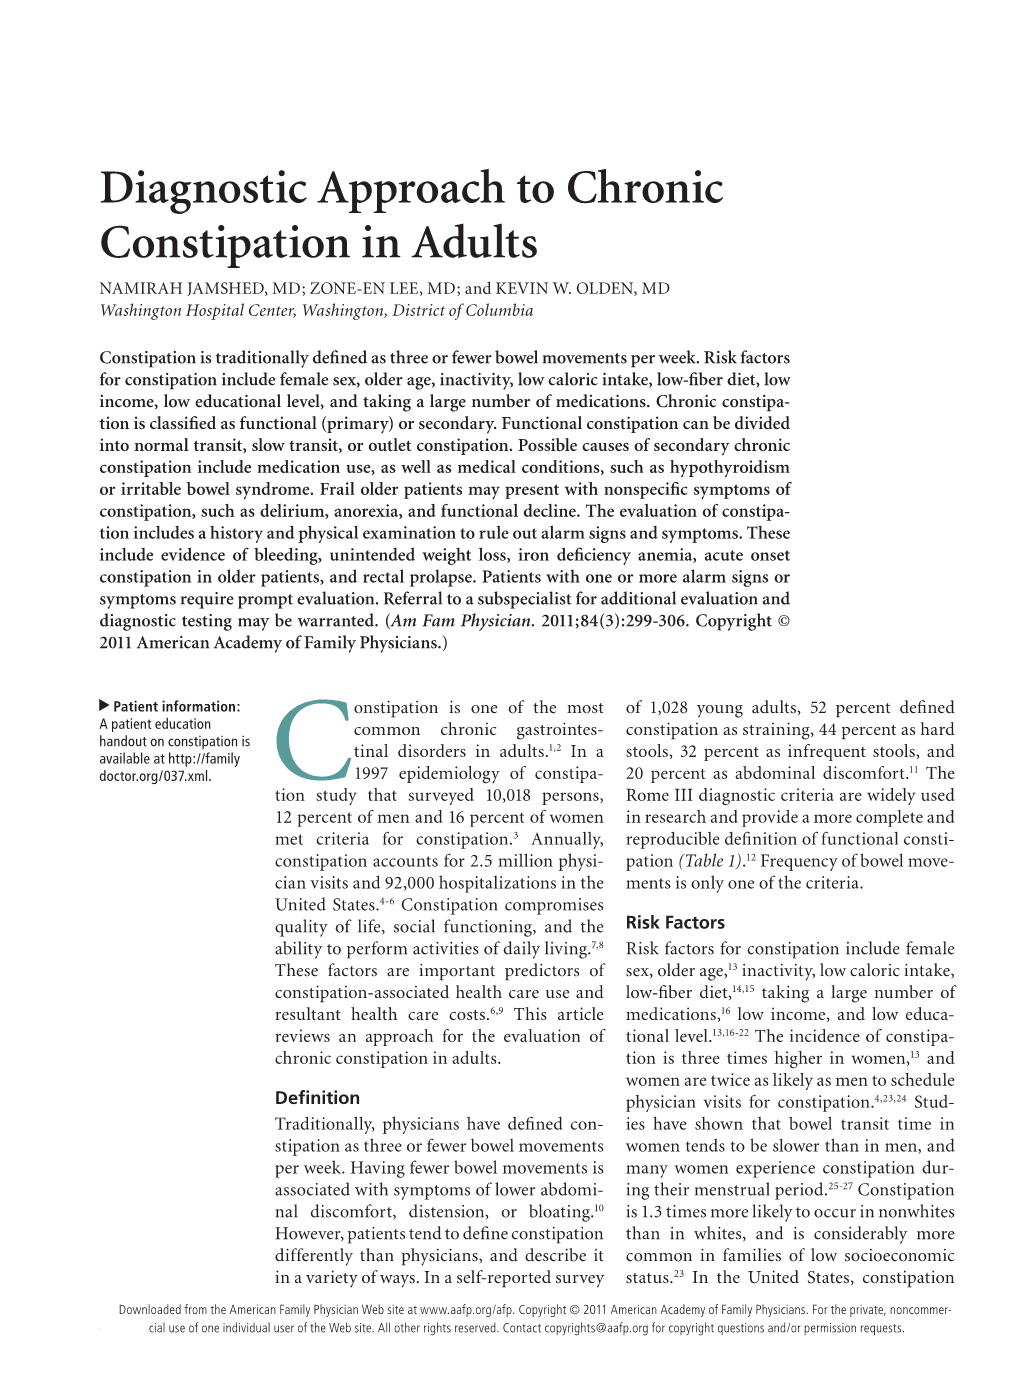 Diagnostic Approach to Chronic Constipation in Adults NAMIRAH JAMSHED, MD; ZONE-EN LEE, MD; and KEVIN W